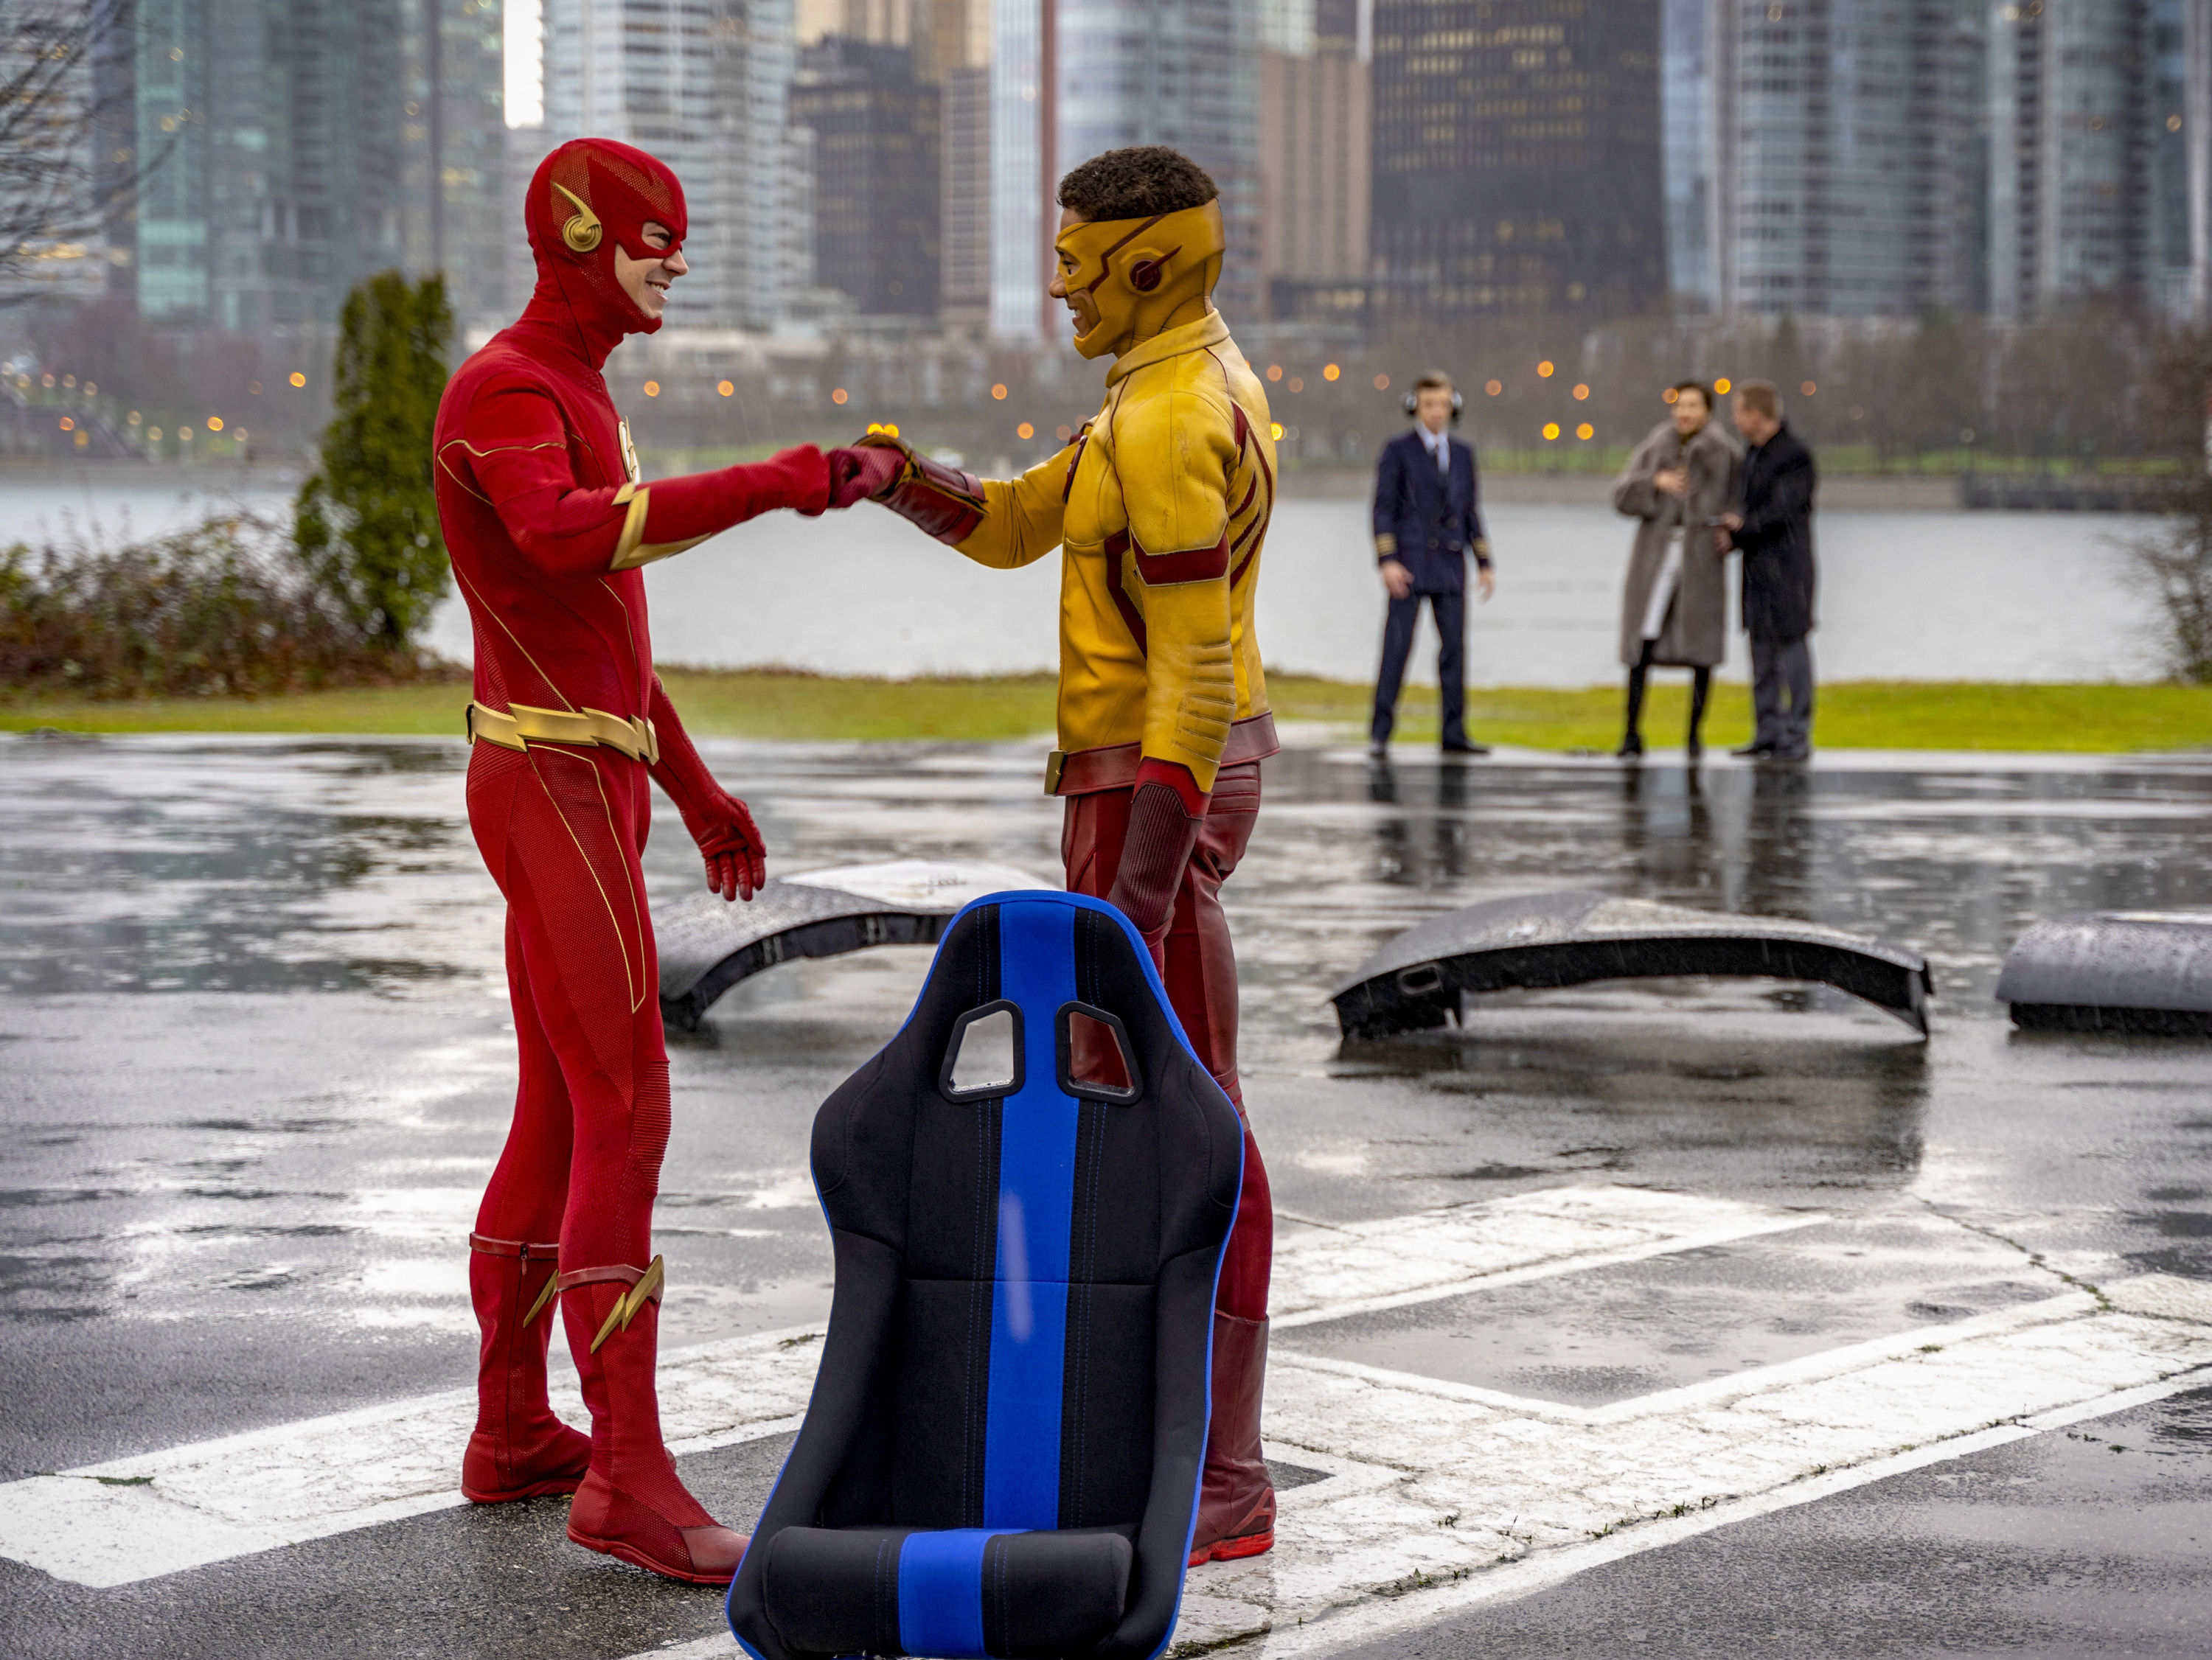 The CW Flash and Kid Flash